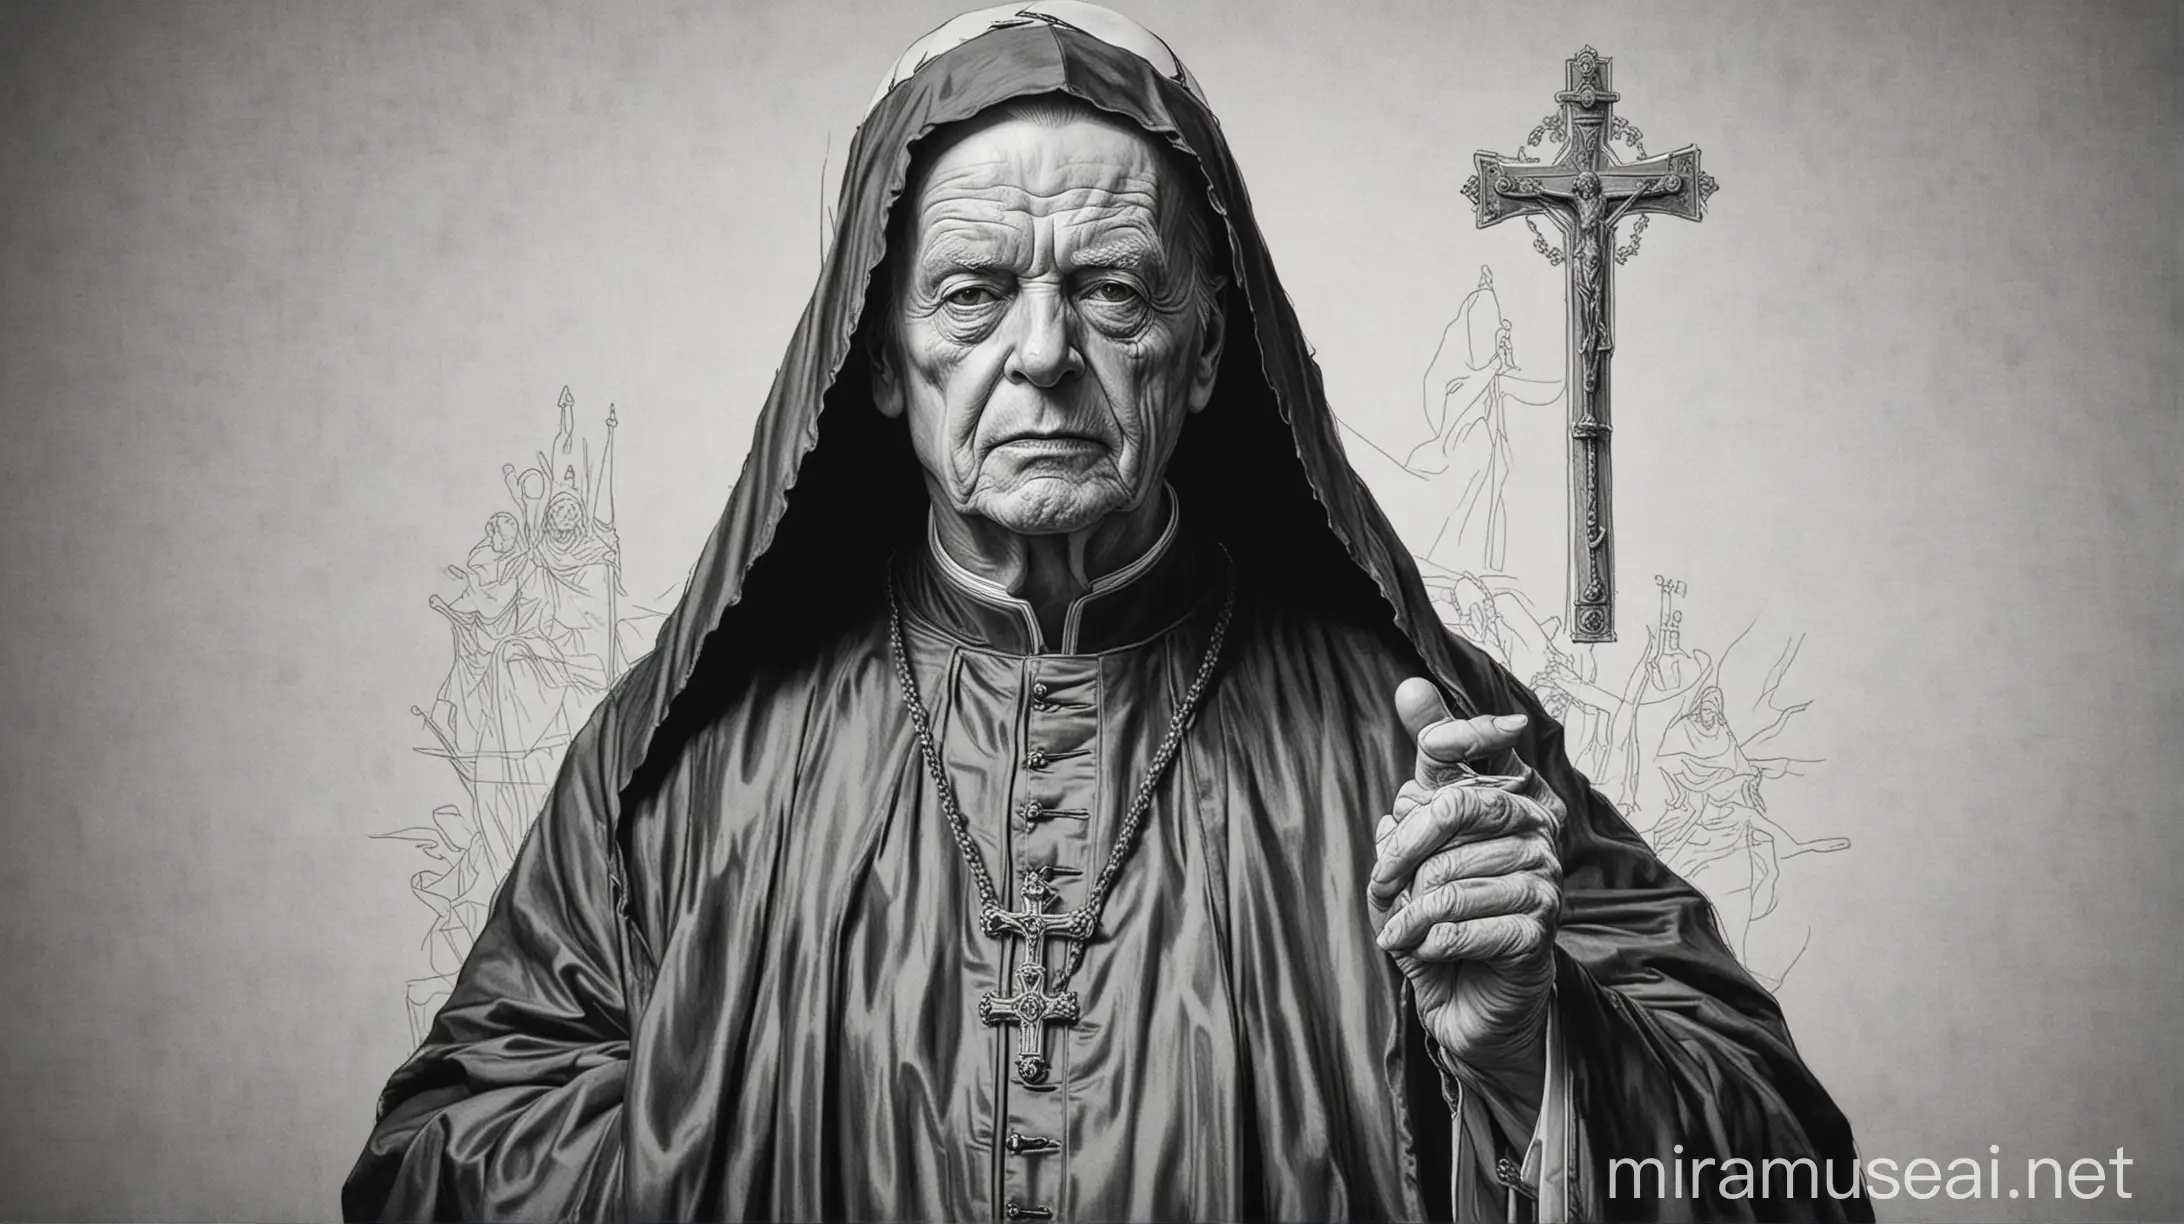 Emperor Palpatine as a Catholic Pope. Black and White line drawing.
